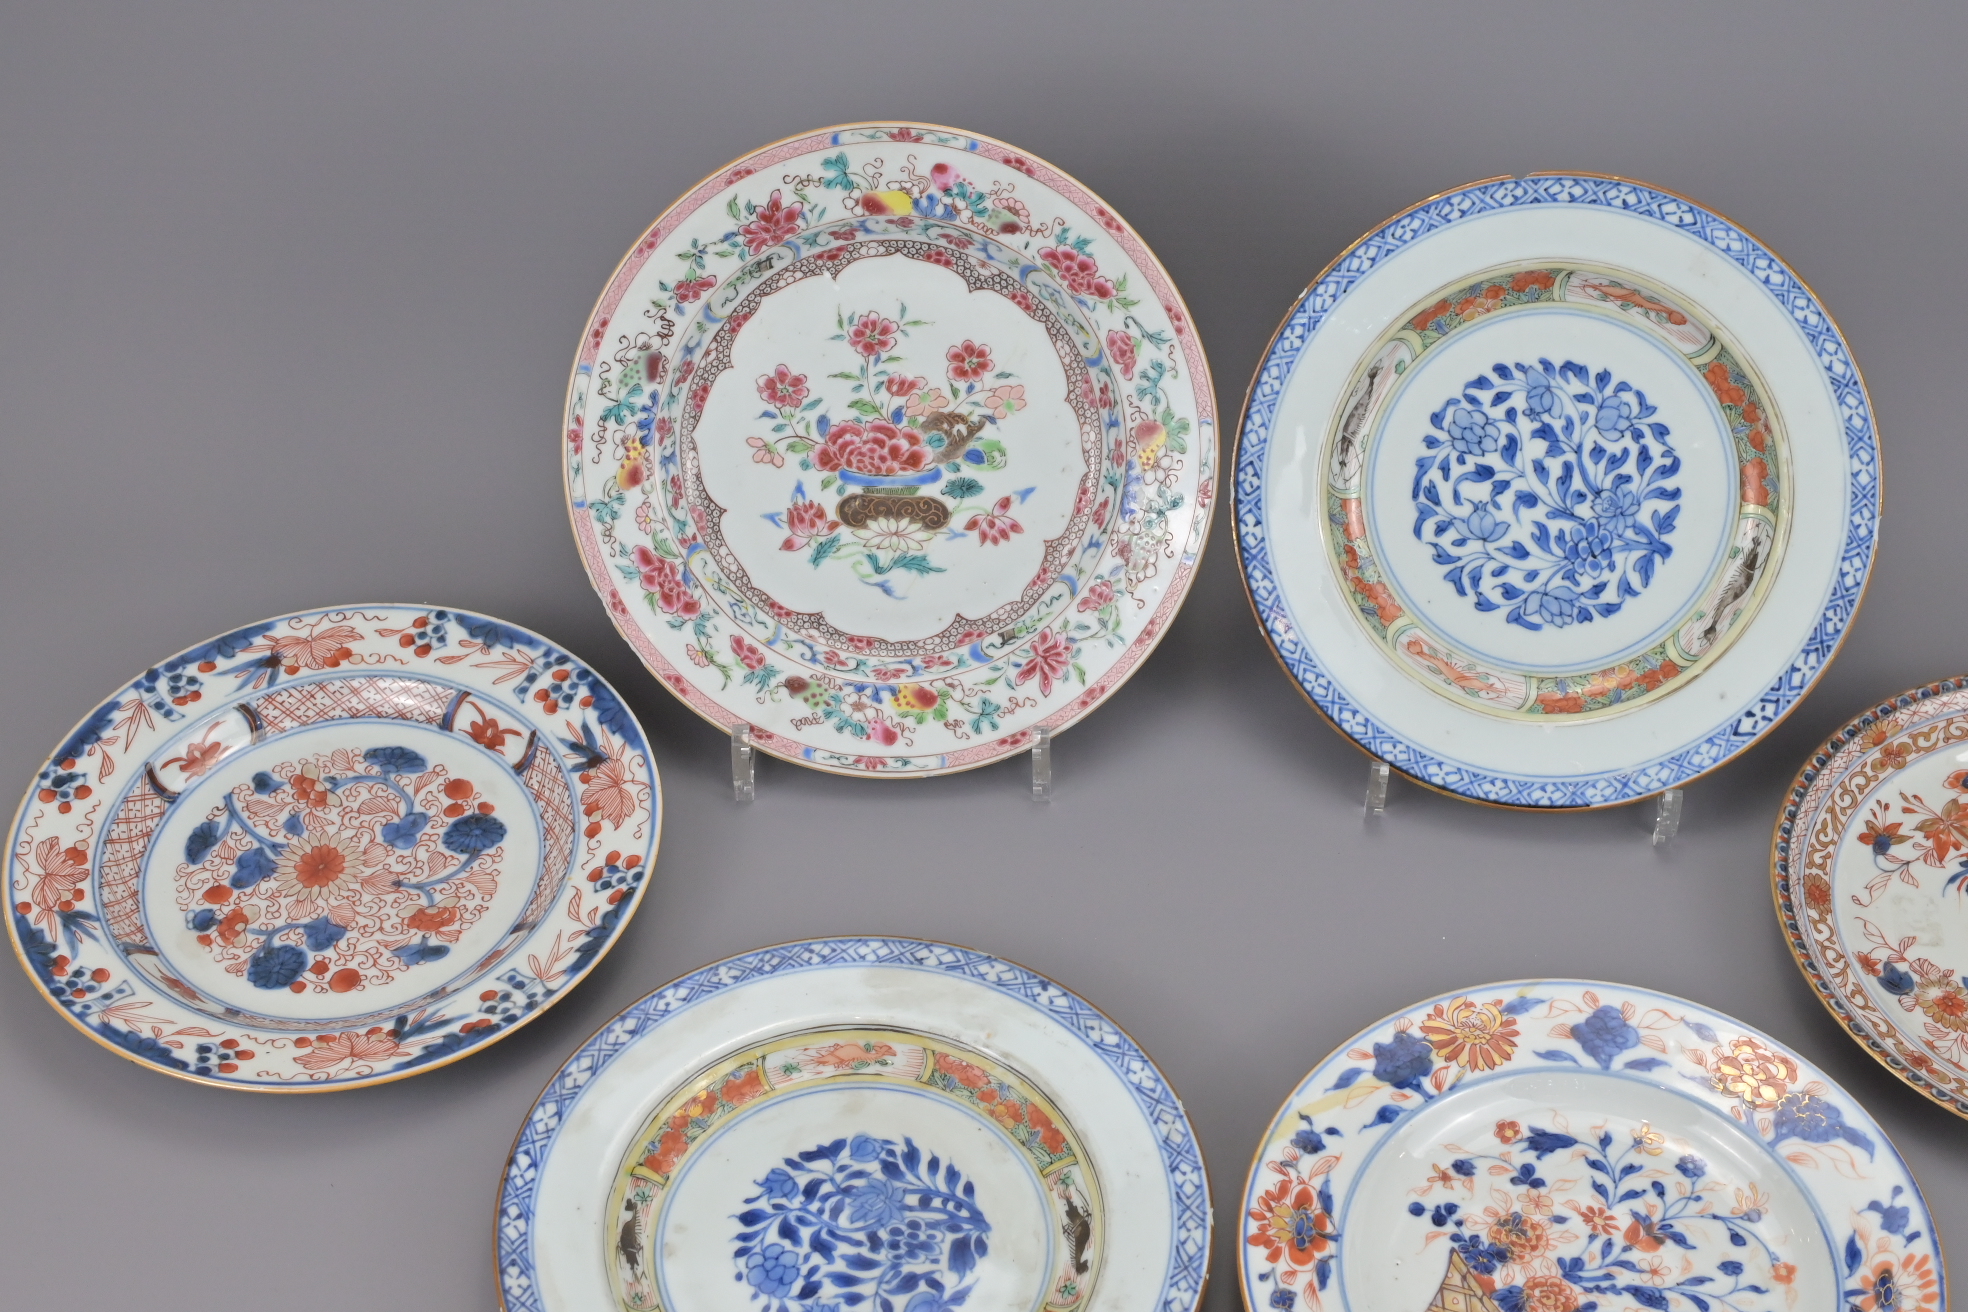 SIX CHINESE FAMILLE ROSE EXPORT PORCELAIN PLATES - Image 2 of 7